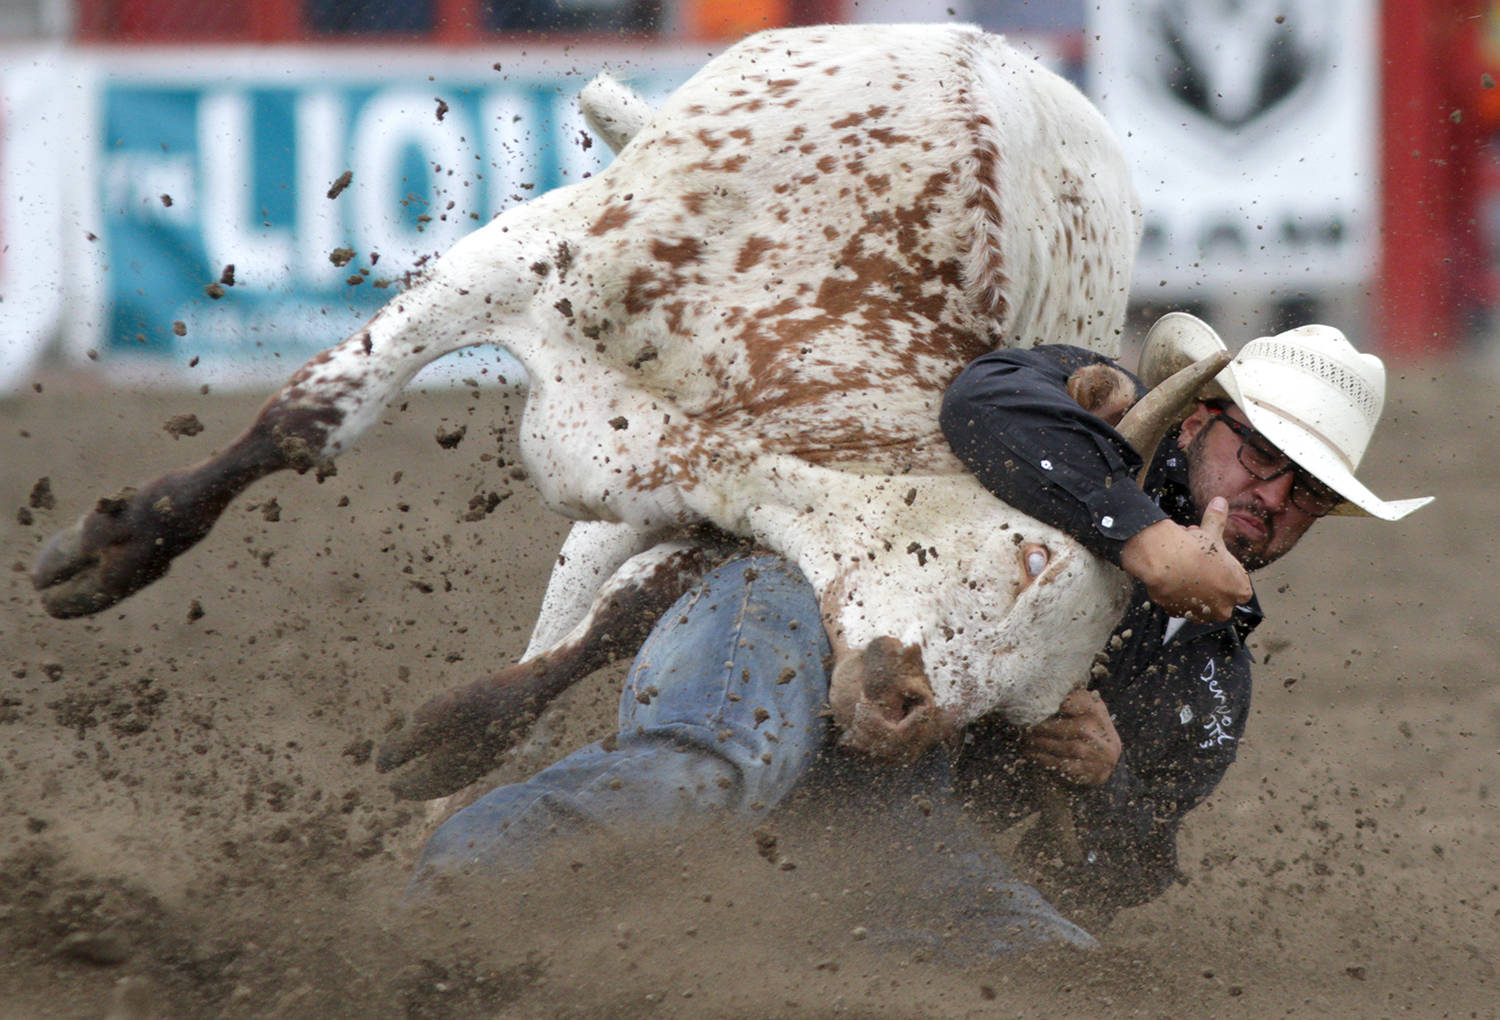 Steer wrestler Layne Delemont kicks up some dirt in his effort to catch this steer on the first day of the Stampede.